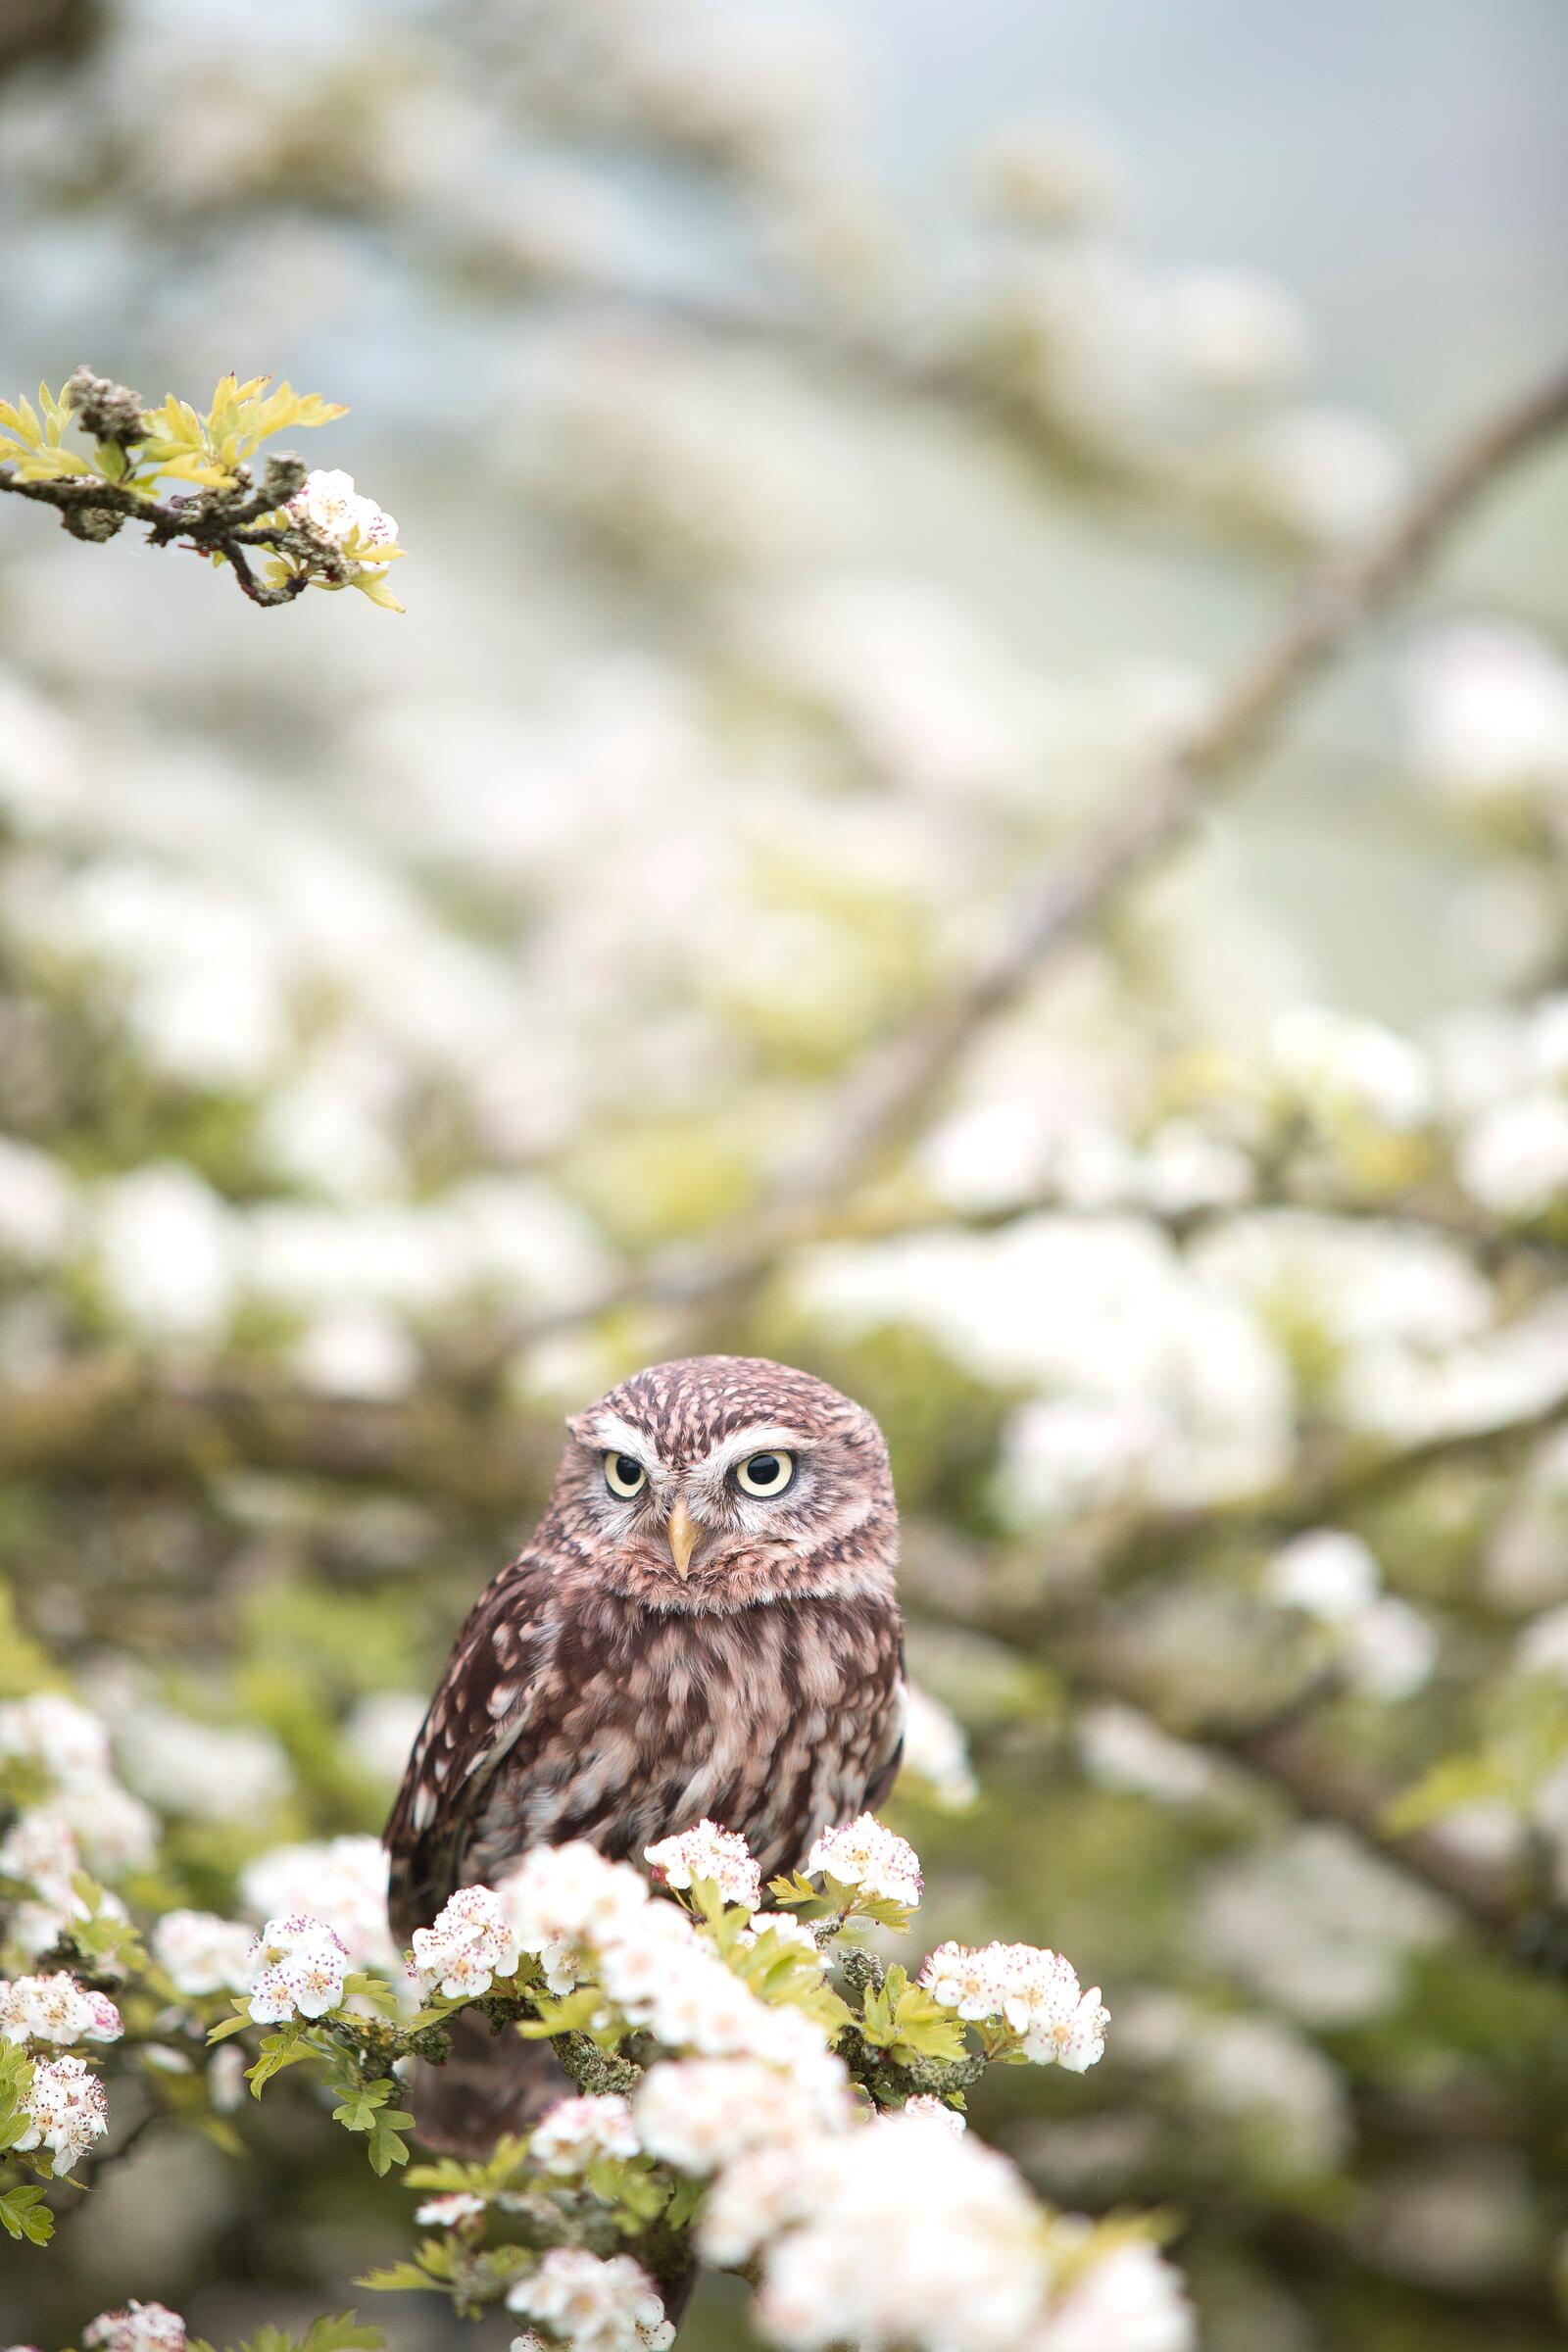 Free photo A little owl sits on a blossoming branch with white flowers